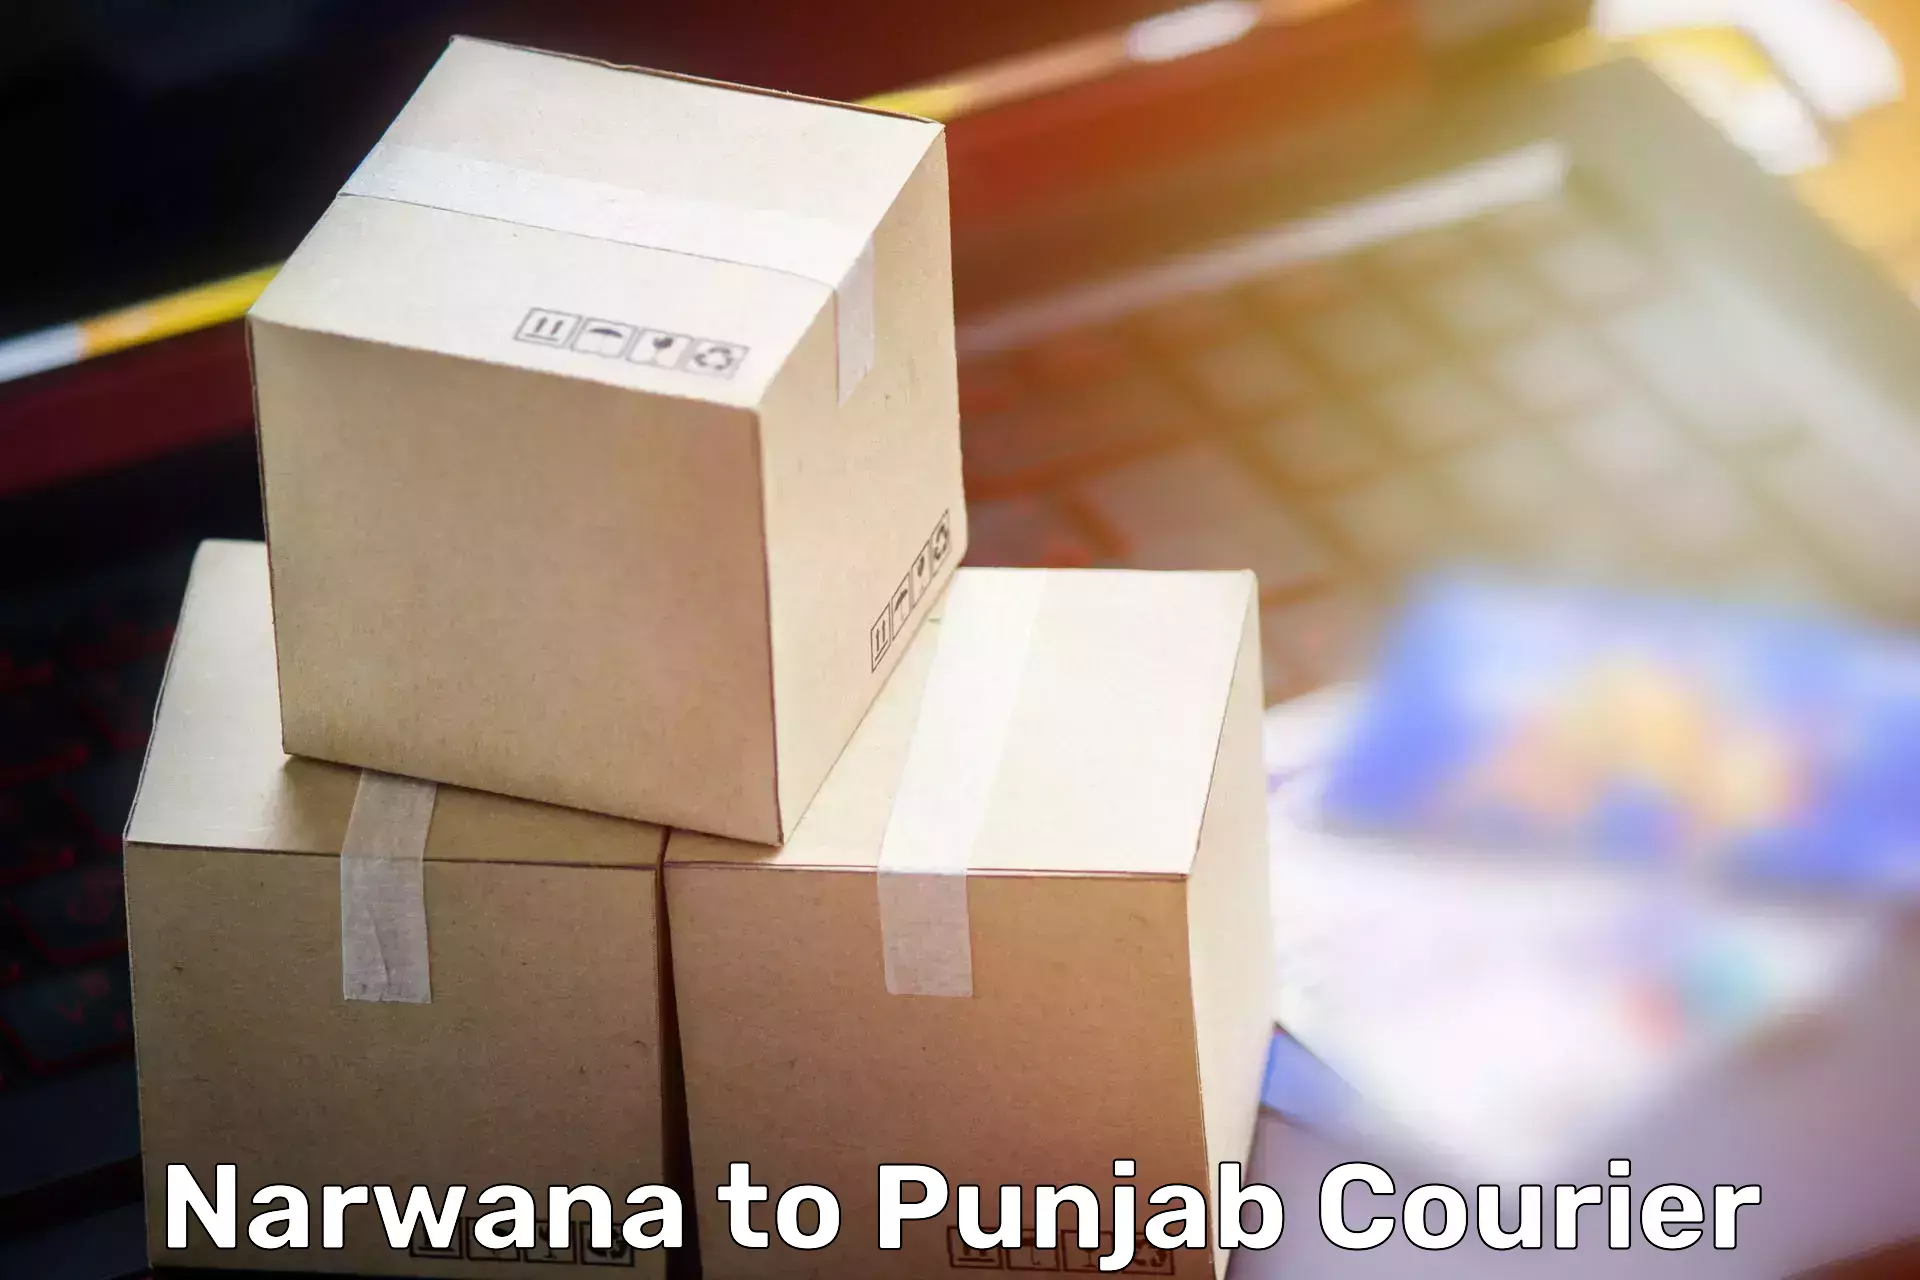 Furniture moving experts Narwana to Sultanpur Lodhi